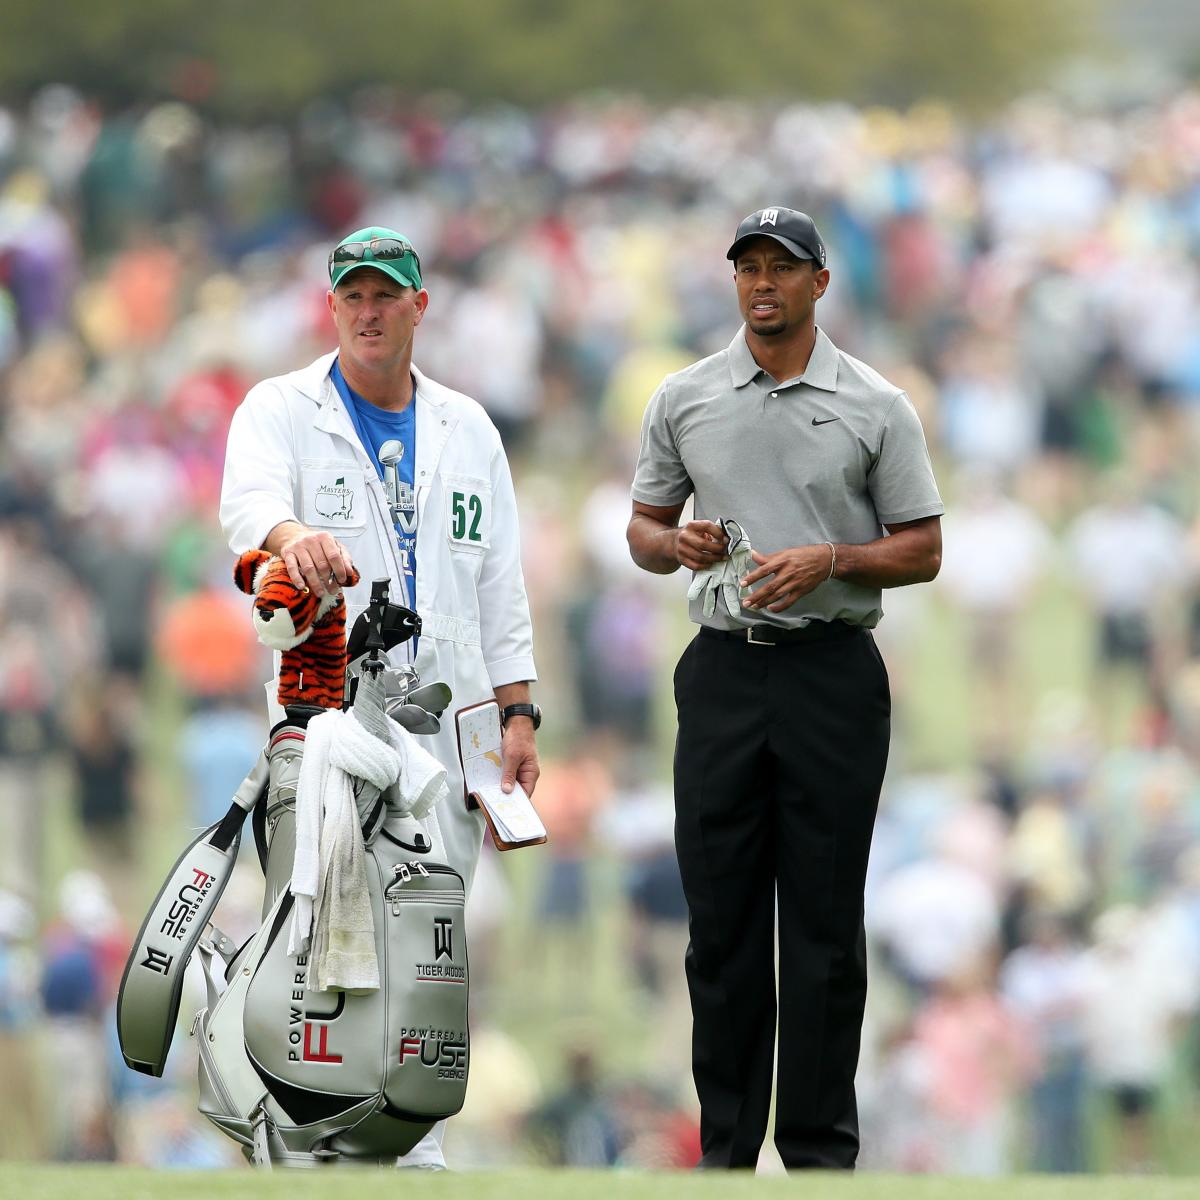 Master Leaderboard Tiger Woods off to Solid Start, Being Chased by